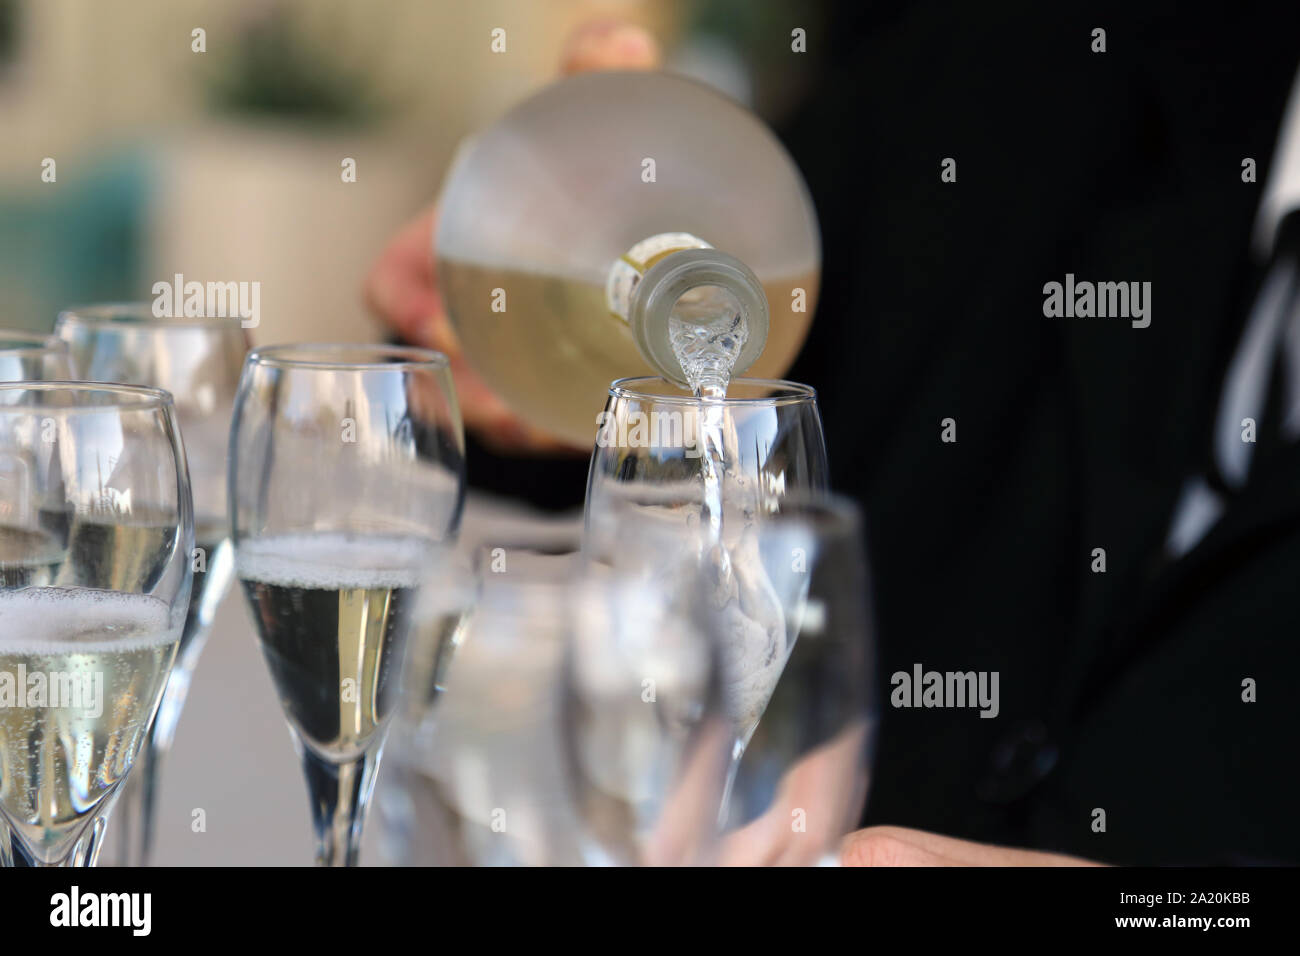 Glass glasses with prosecco - setting up the glasses on the table in the restaurant for an aperitif Stock Photo